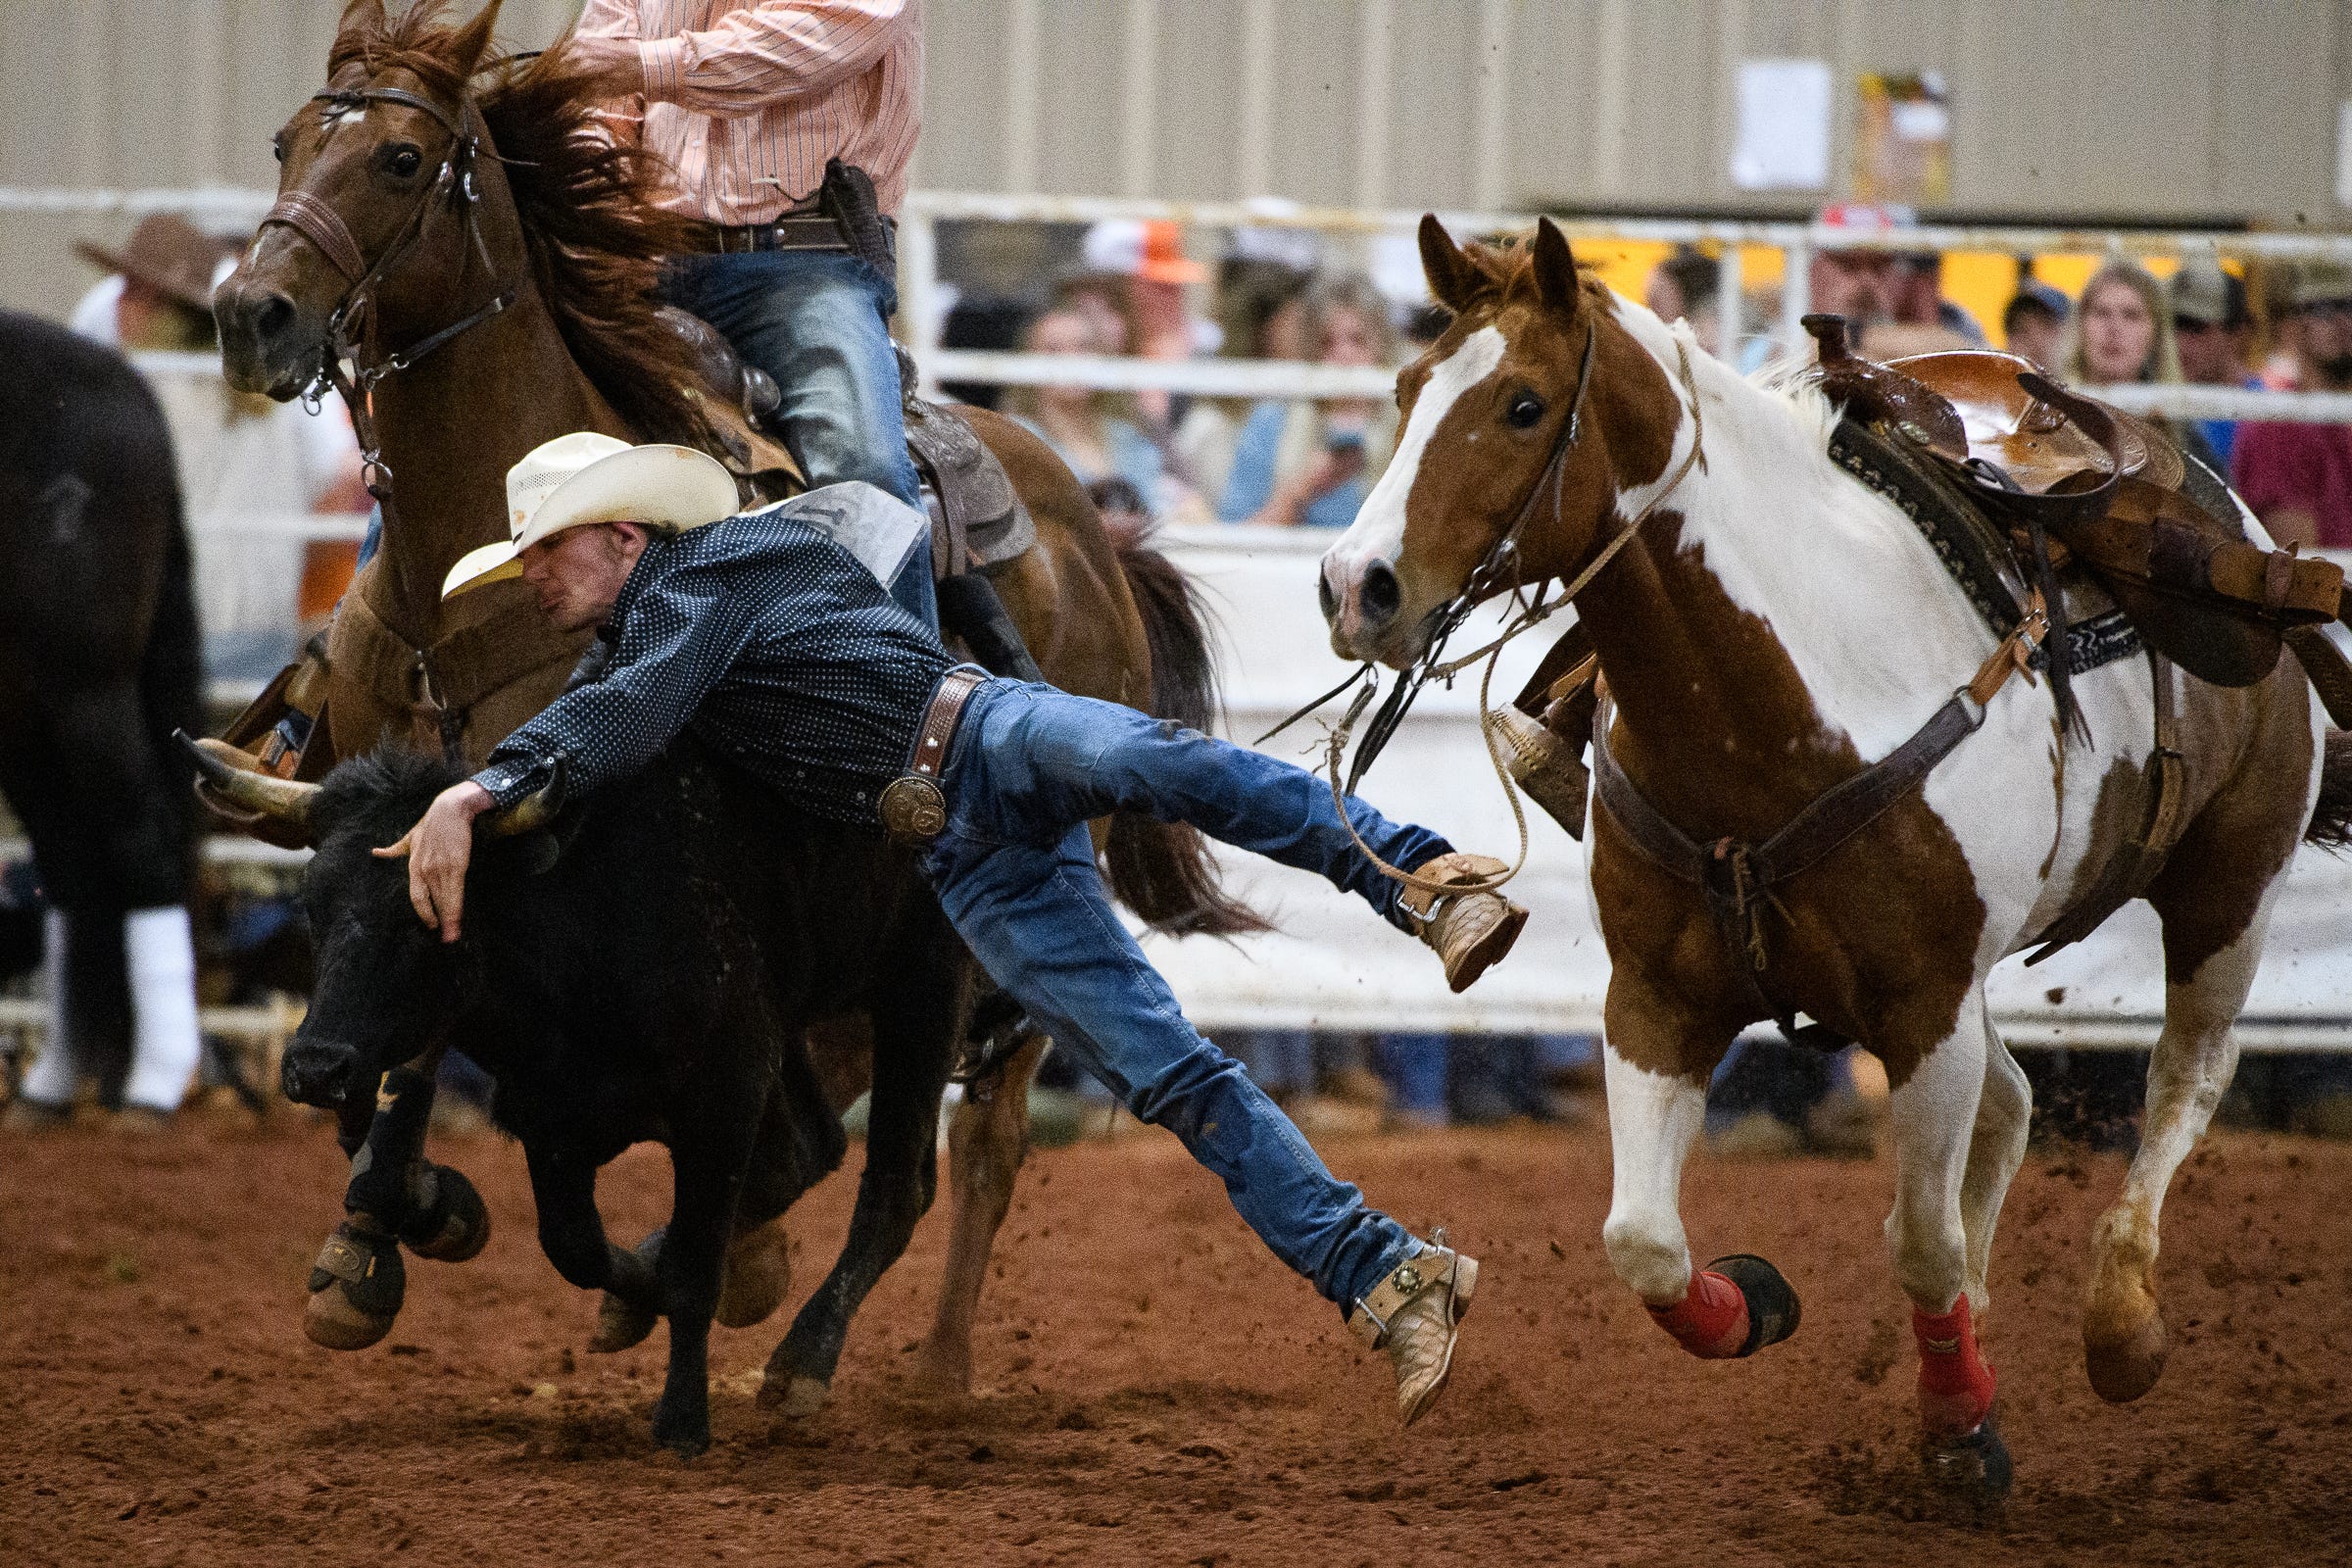 Reign Dobbins competes in the steer wrestling event during a rodeo at the Crescent High School FFA Arena Saturday, May 1, 2021.